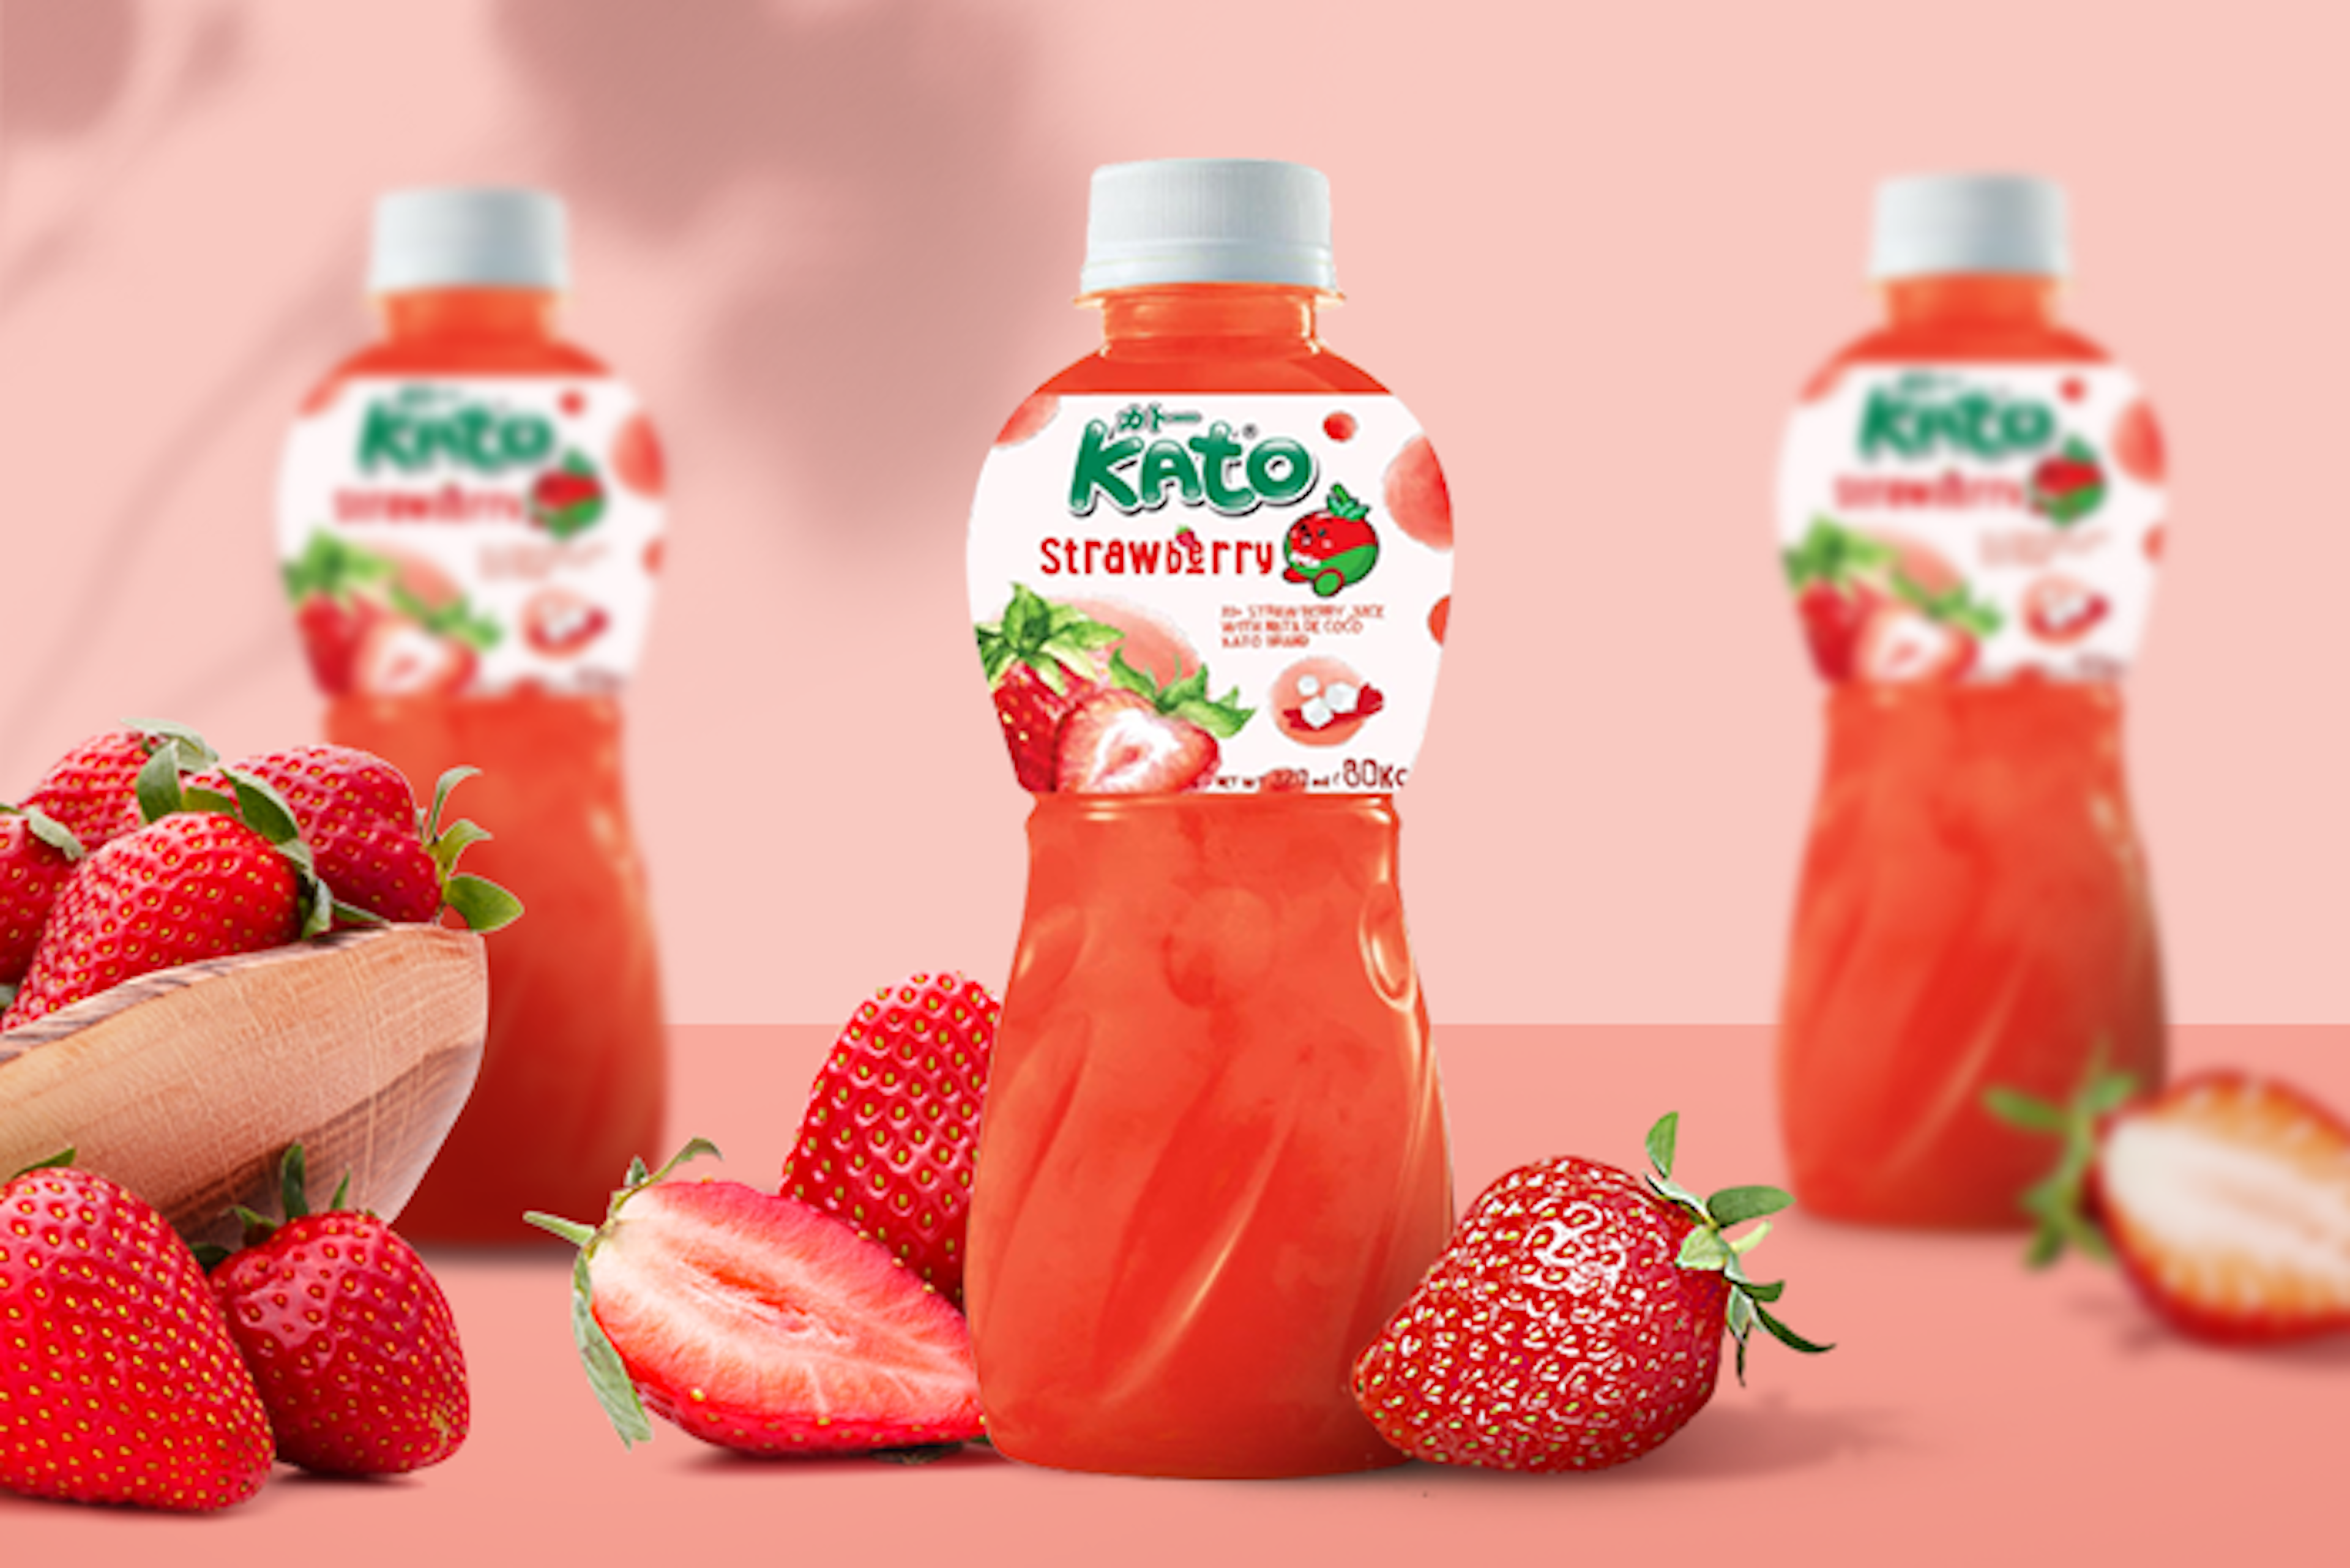 KATO Strawberry Juice with Nata De Coco 320ml - Refreshing and Fruity Drink